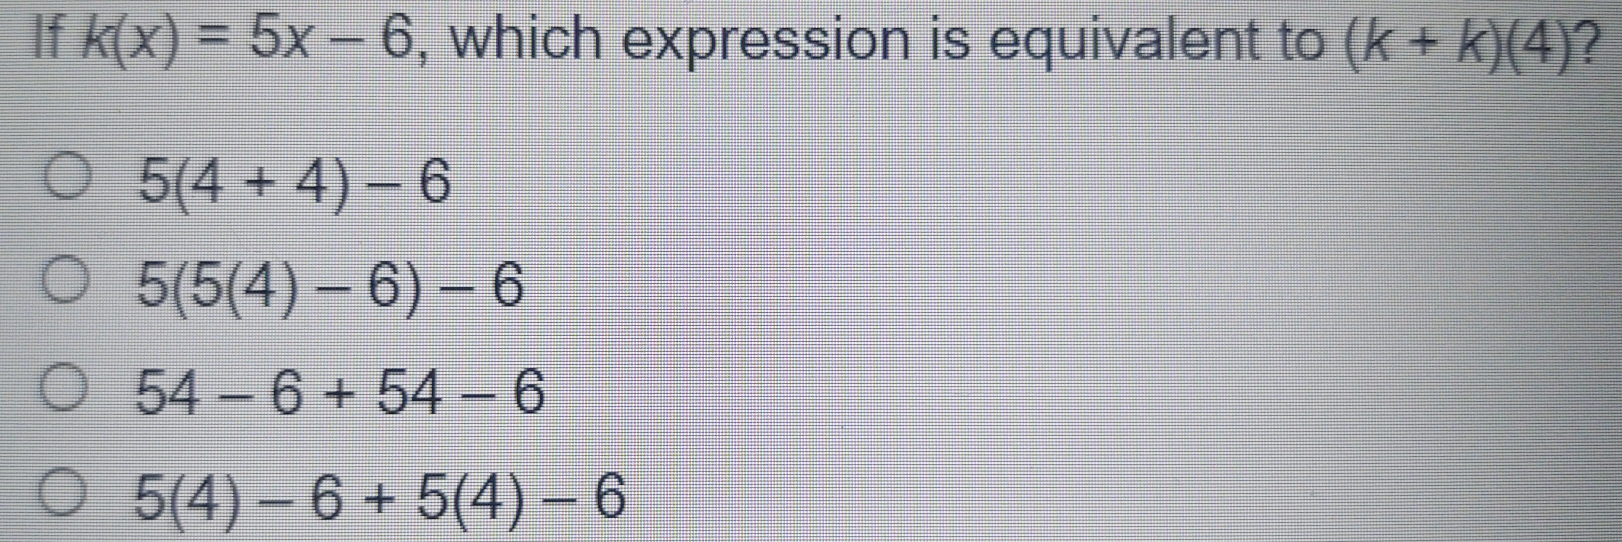 If kx=5x-6 , which expression is equivalent to k+k4? 54+4-6 554-6-6 54-6+54-6 54-6+54-6